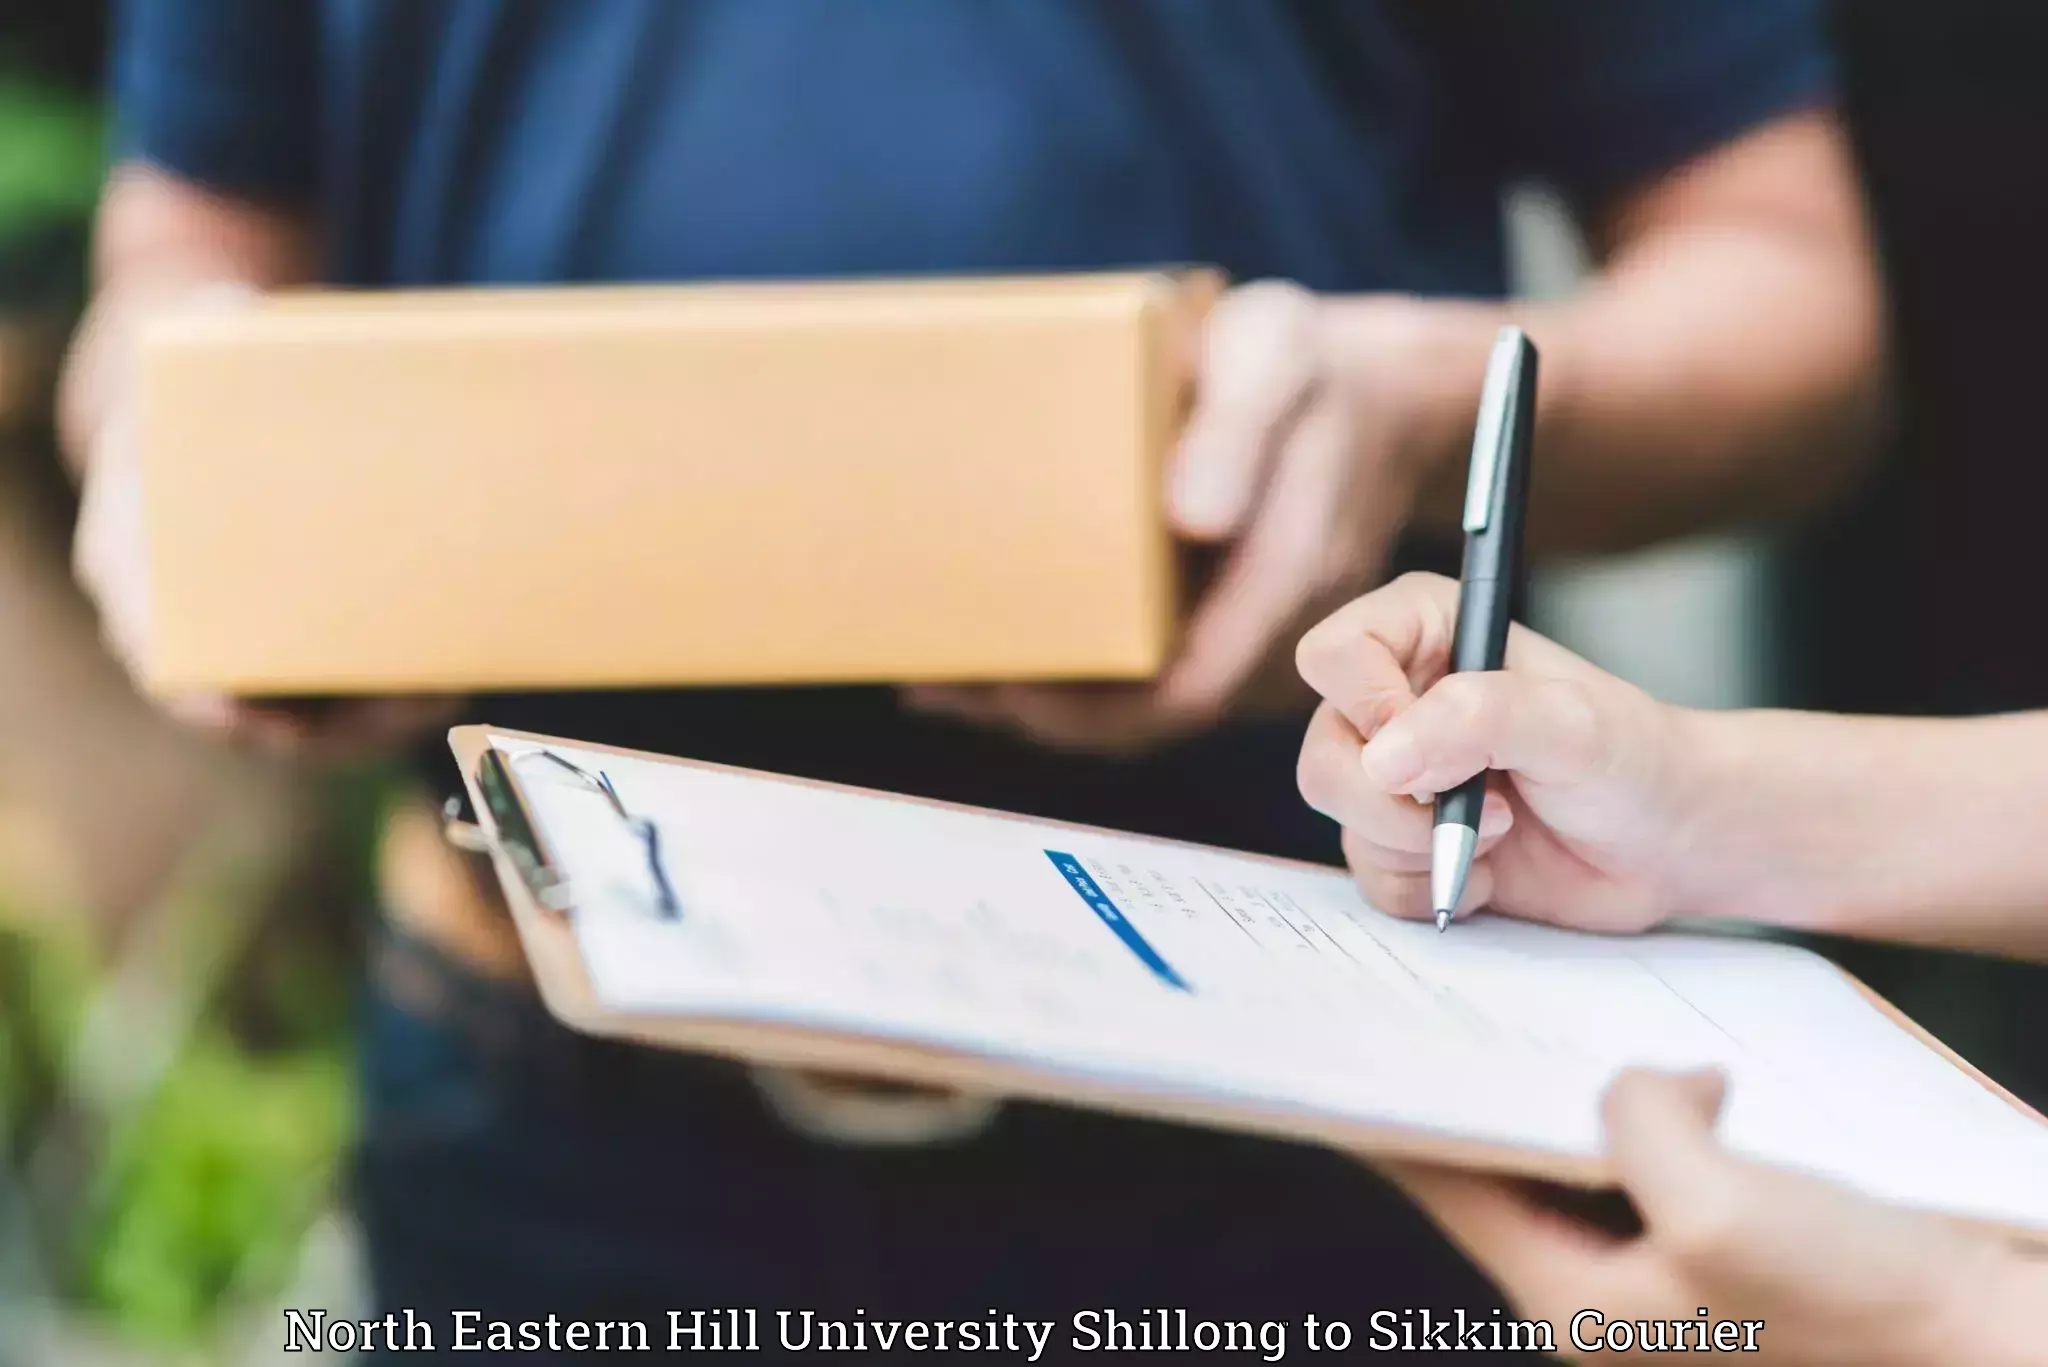 Reliable movers North Eastern Hill University Shillong to Geyzing